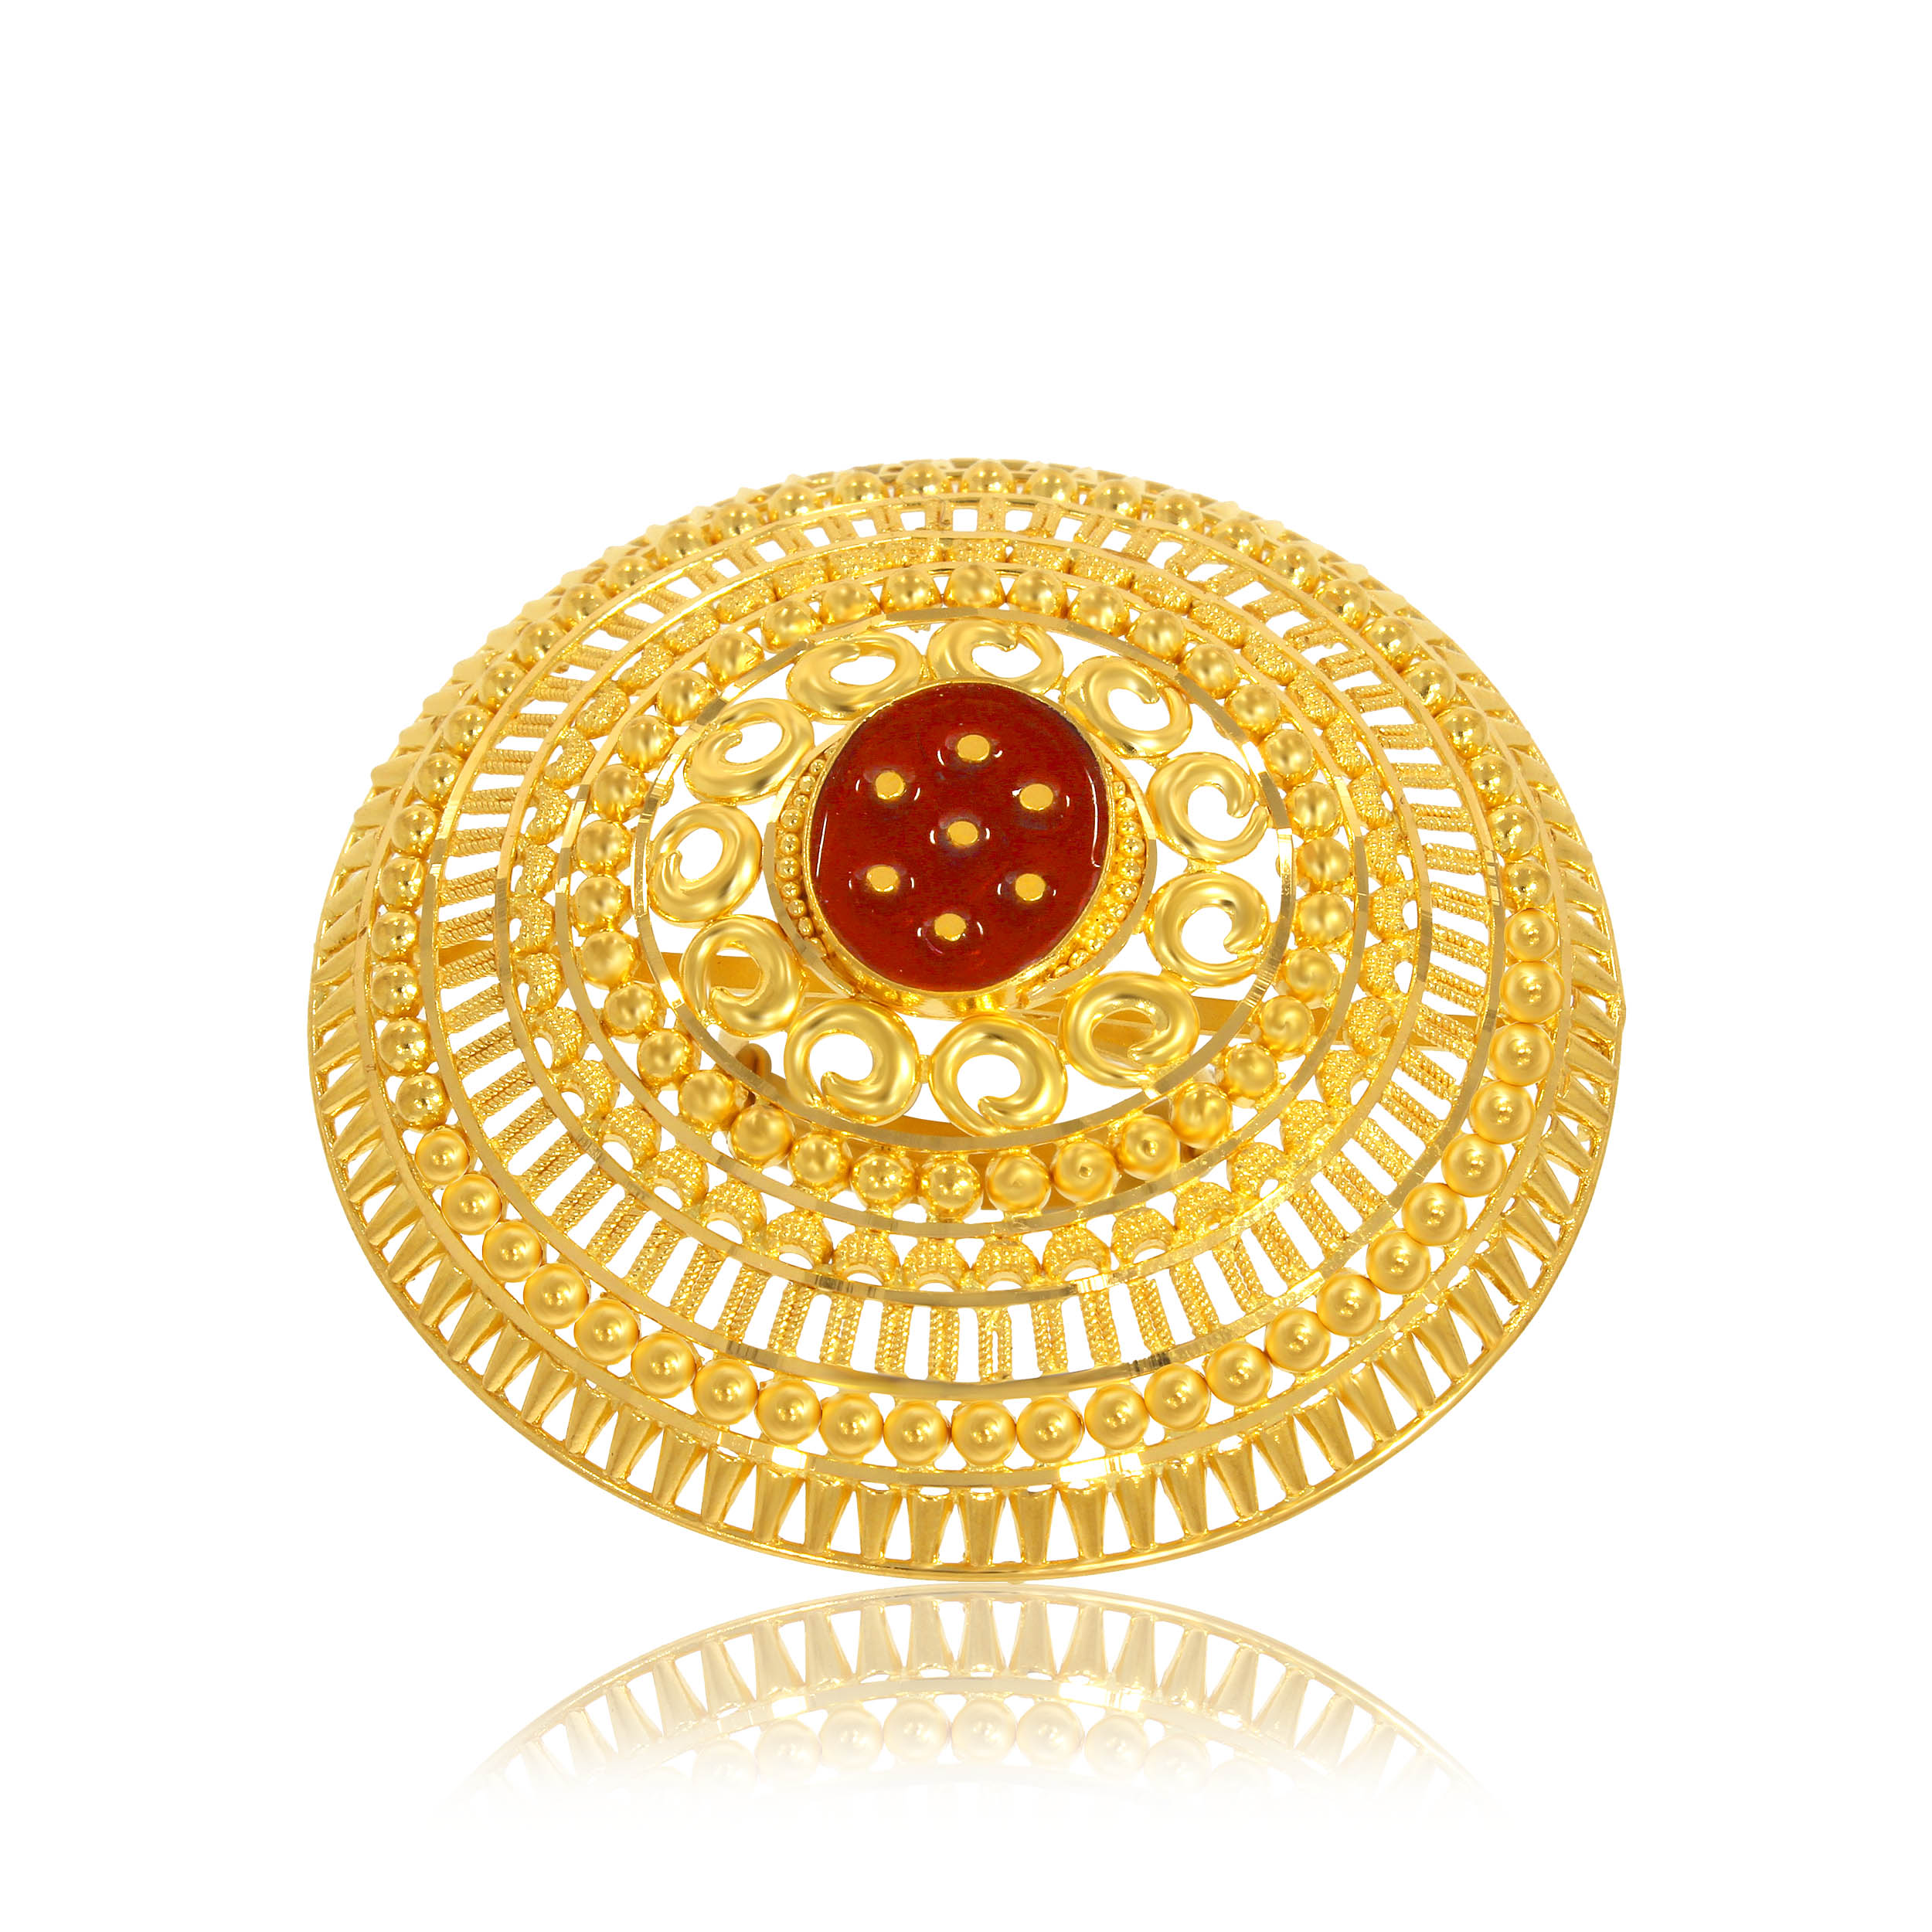 queen aabi jewels 22ct bis hallmark gold big size round ring for